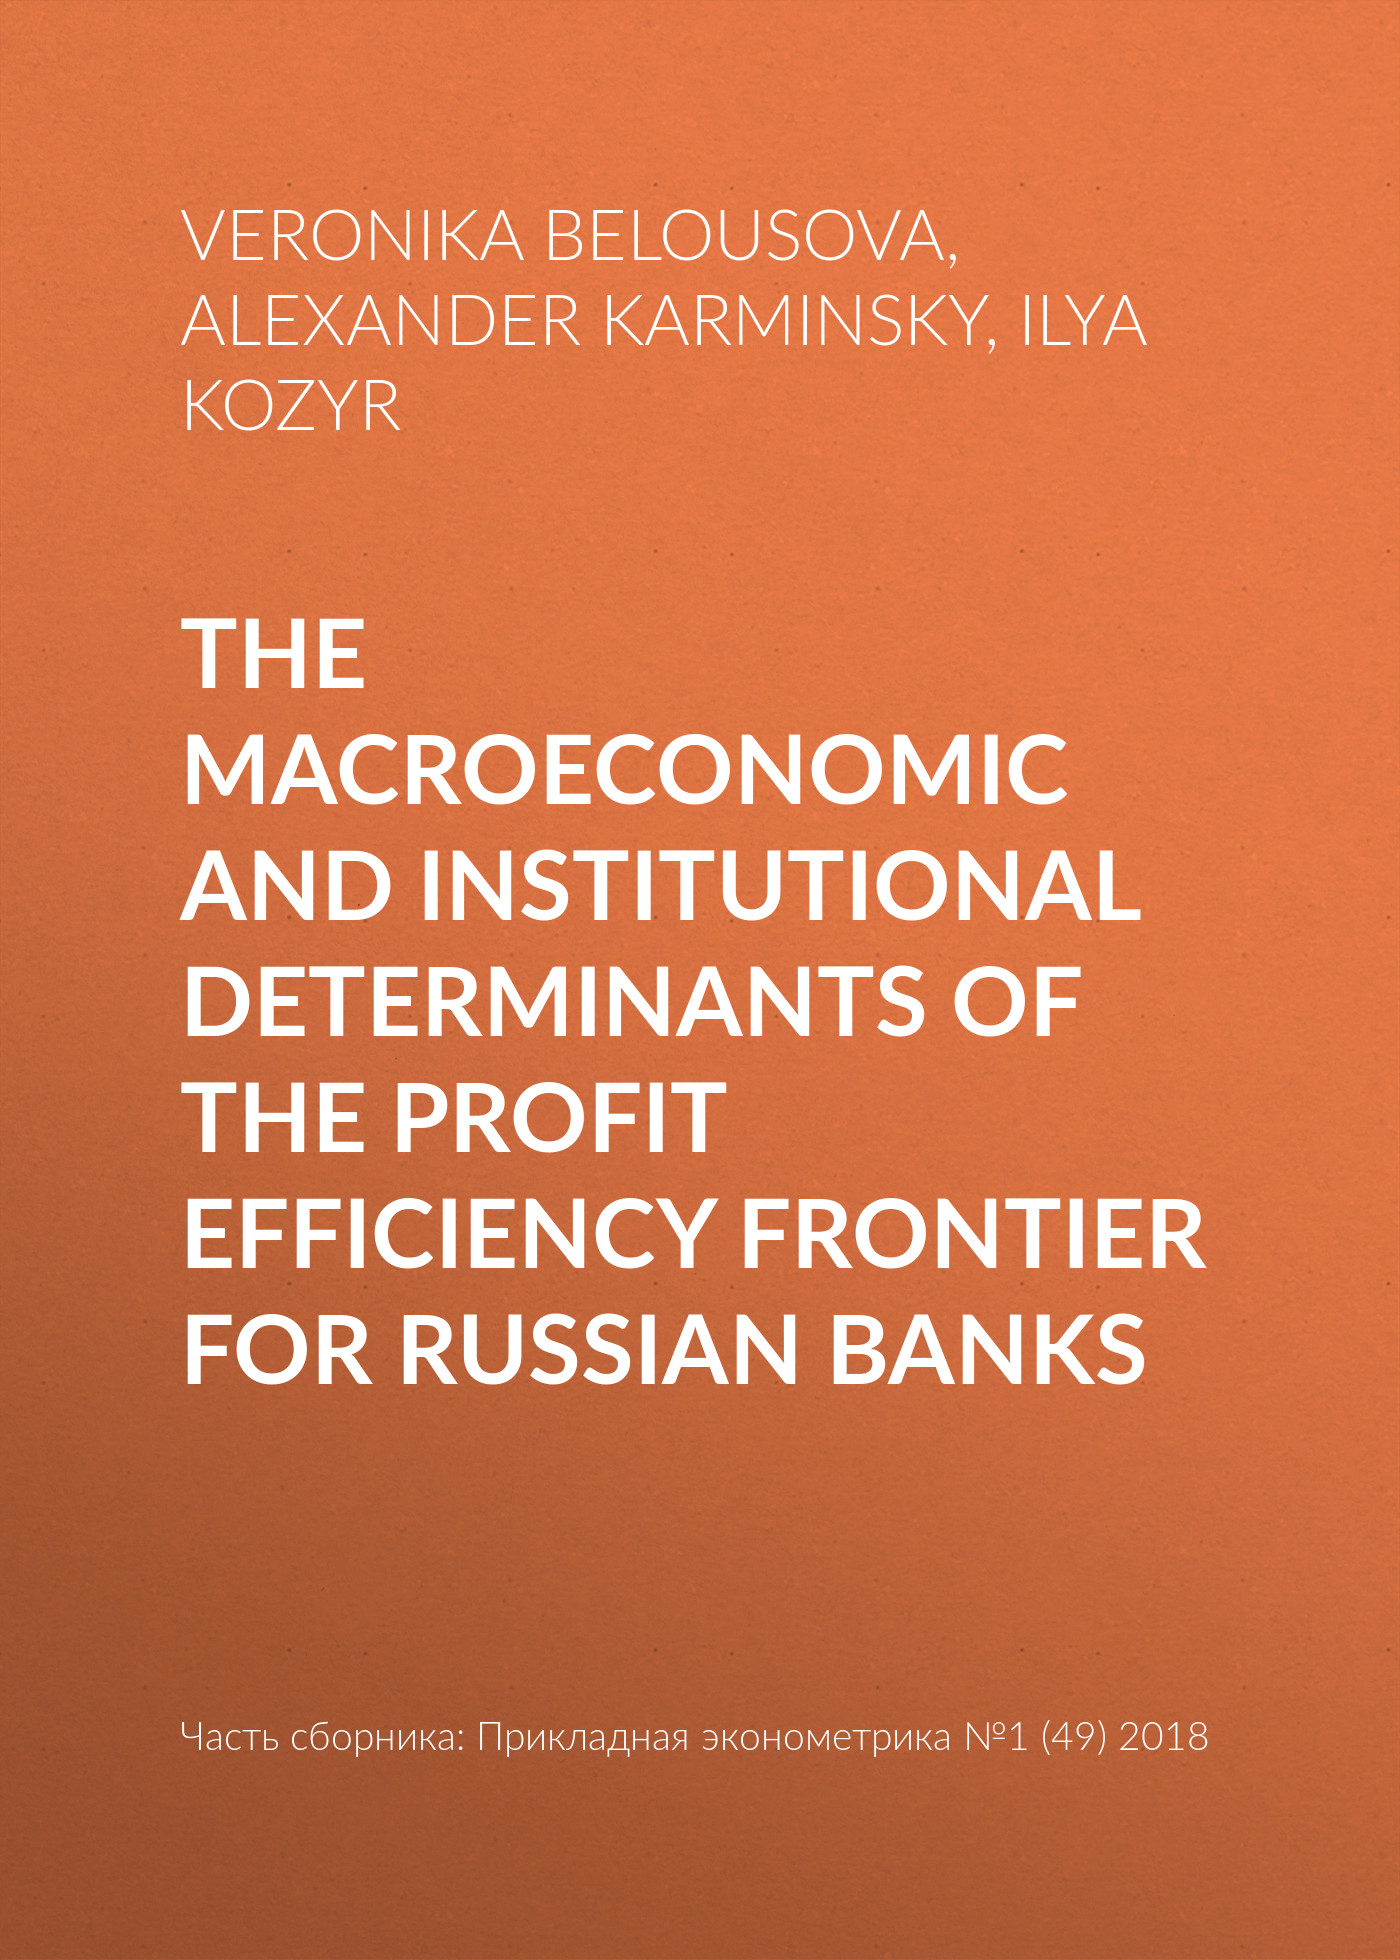 The macroeconomic and institutional determinants of the profit efficiency frontier for Russian banks